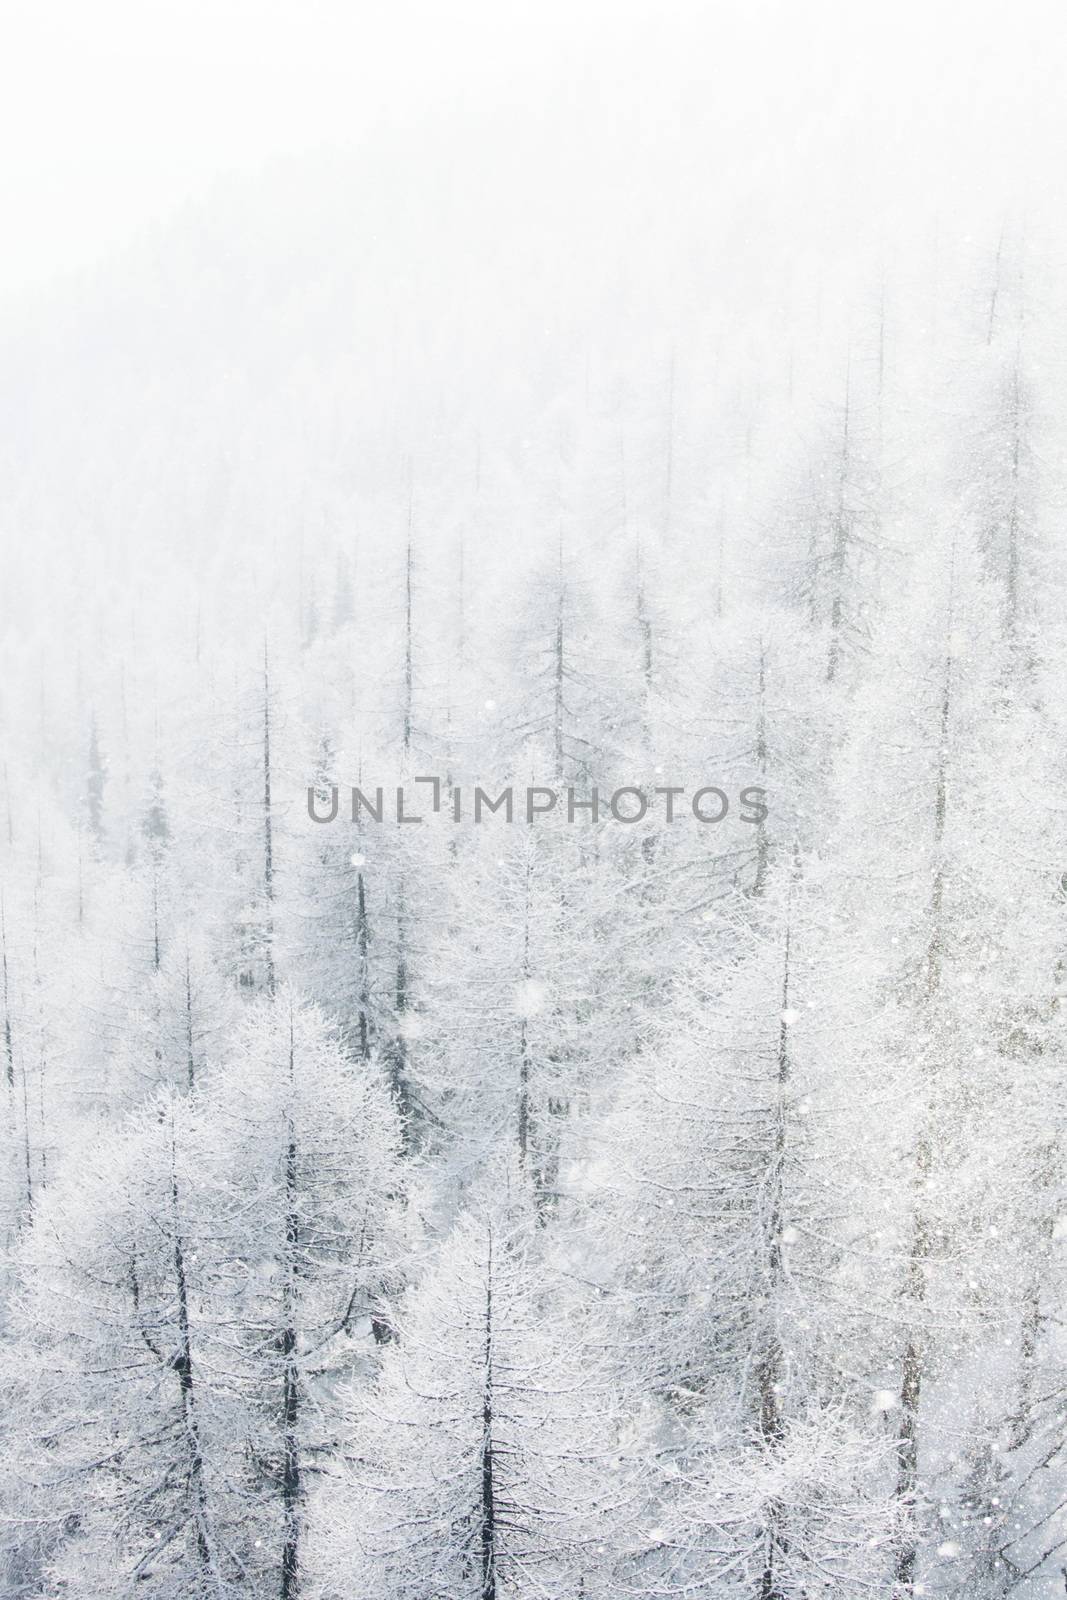 Winter landscape with mountain forest of snow covered trees